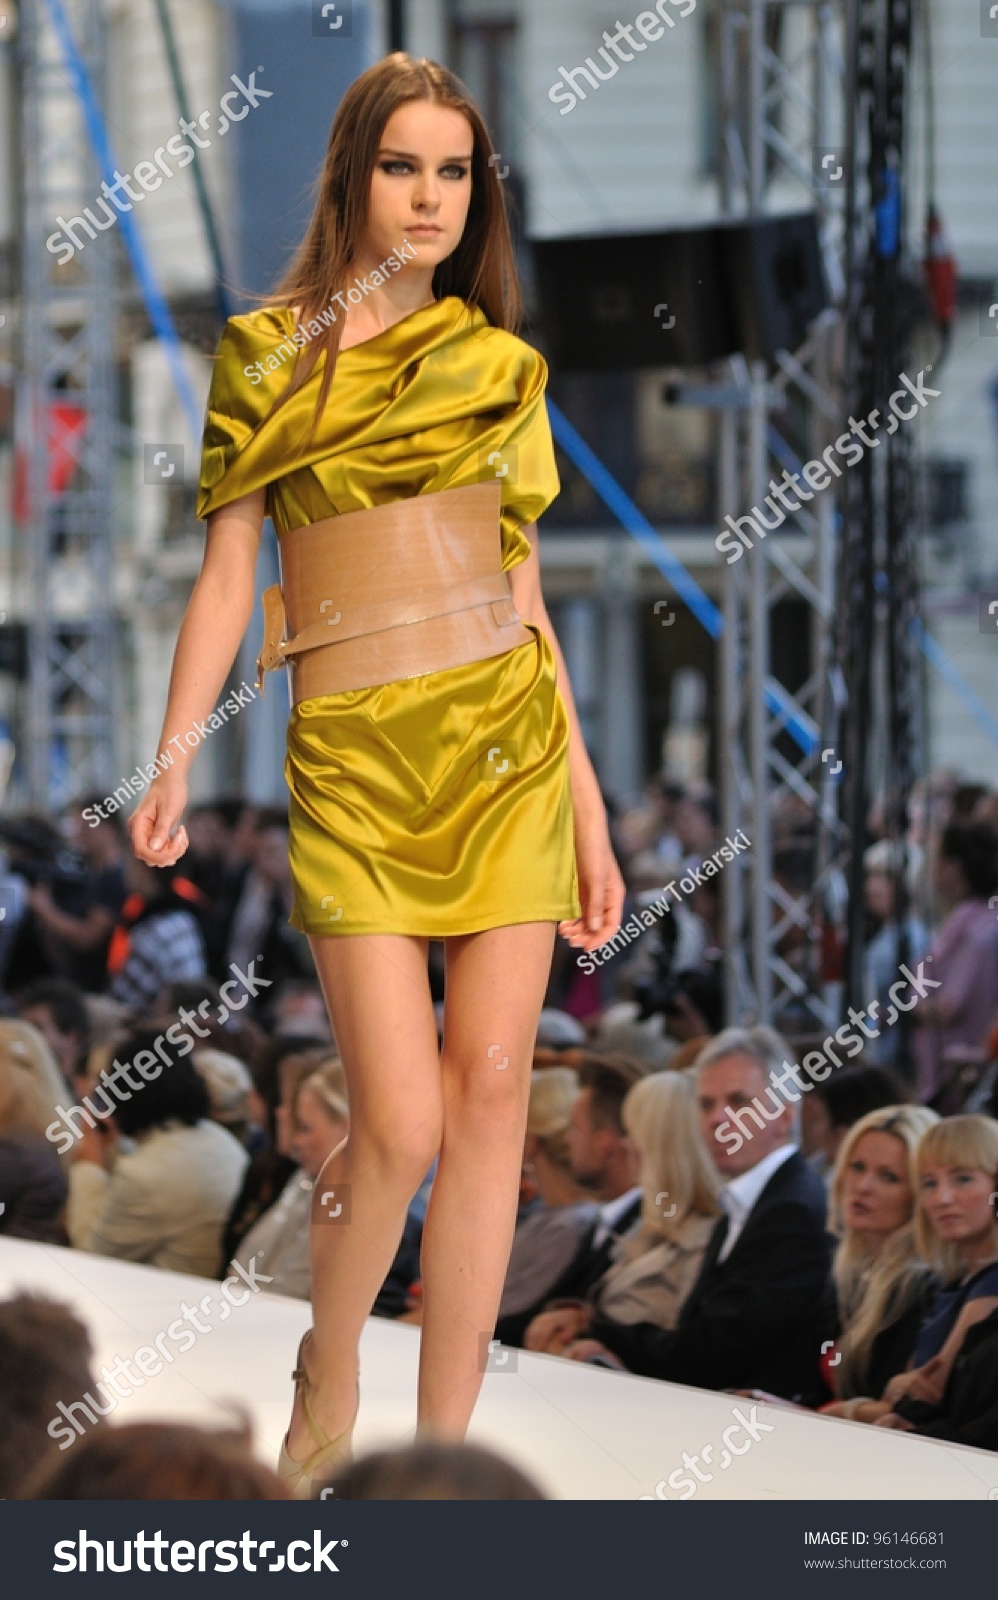 Warsaw - June 26: Model Walk On The Catwalk Showcasing The Collection ...